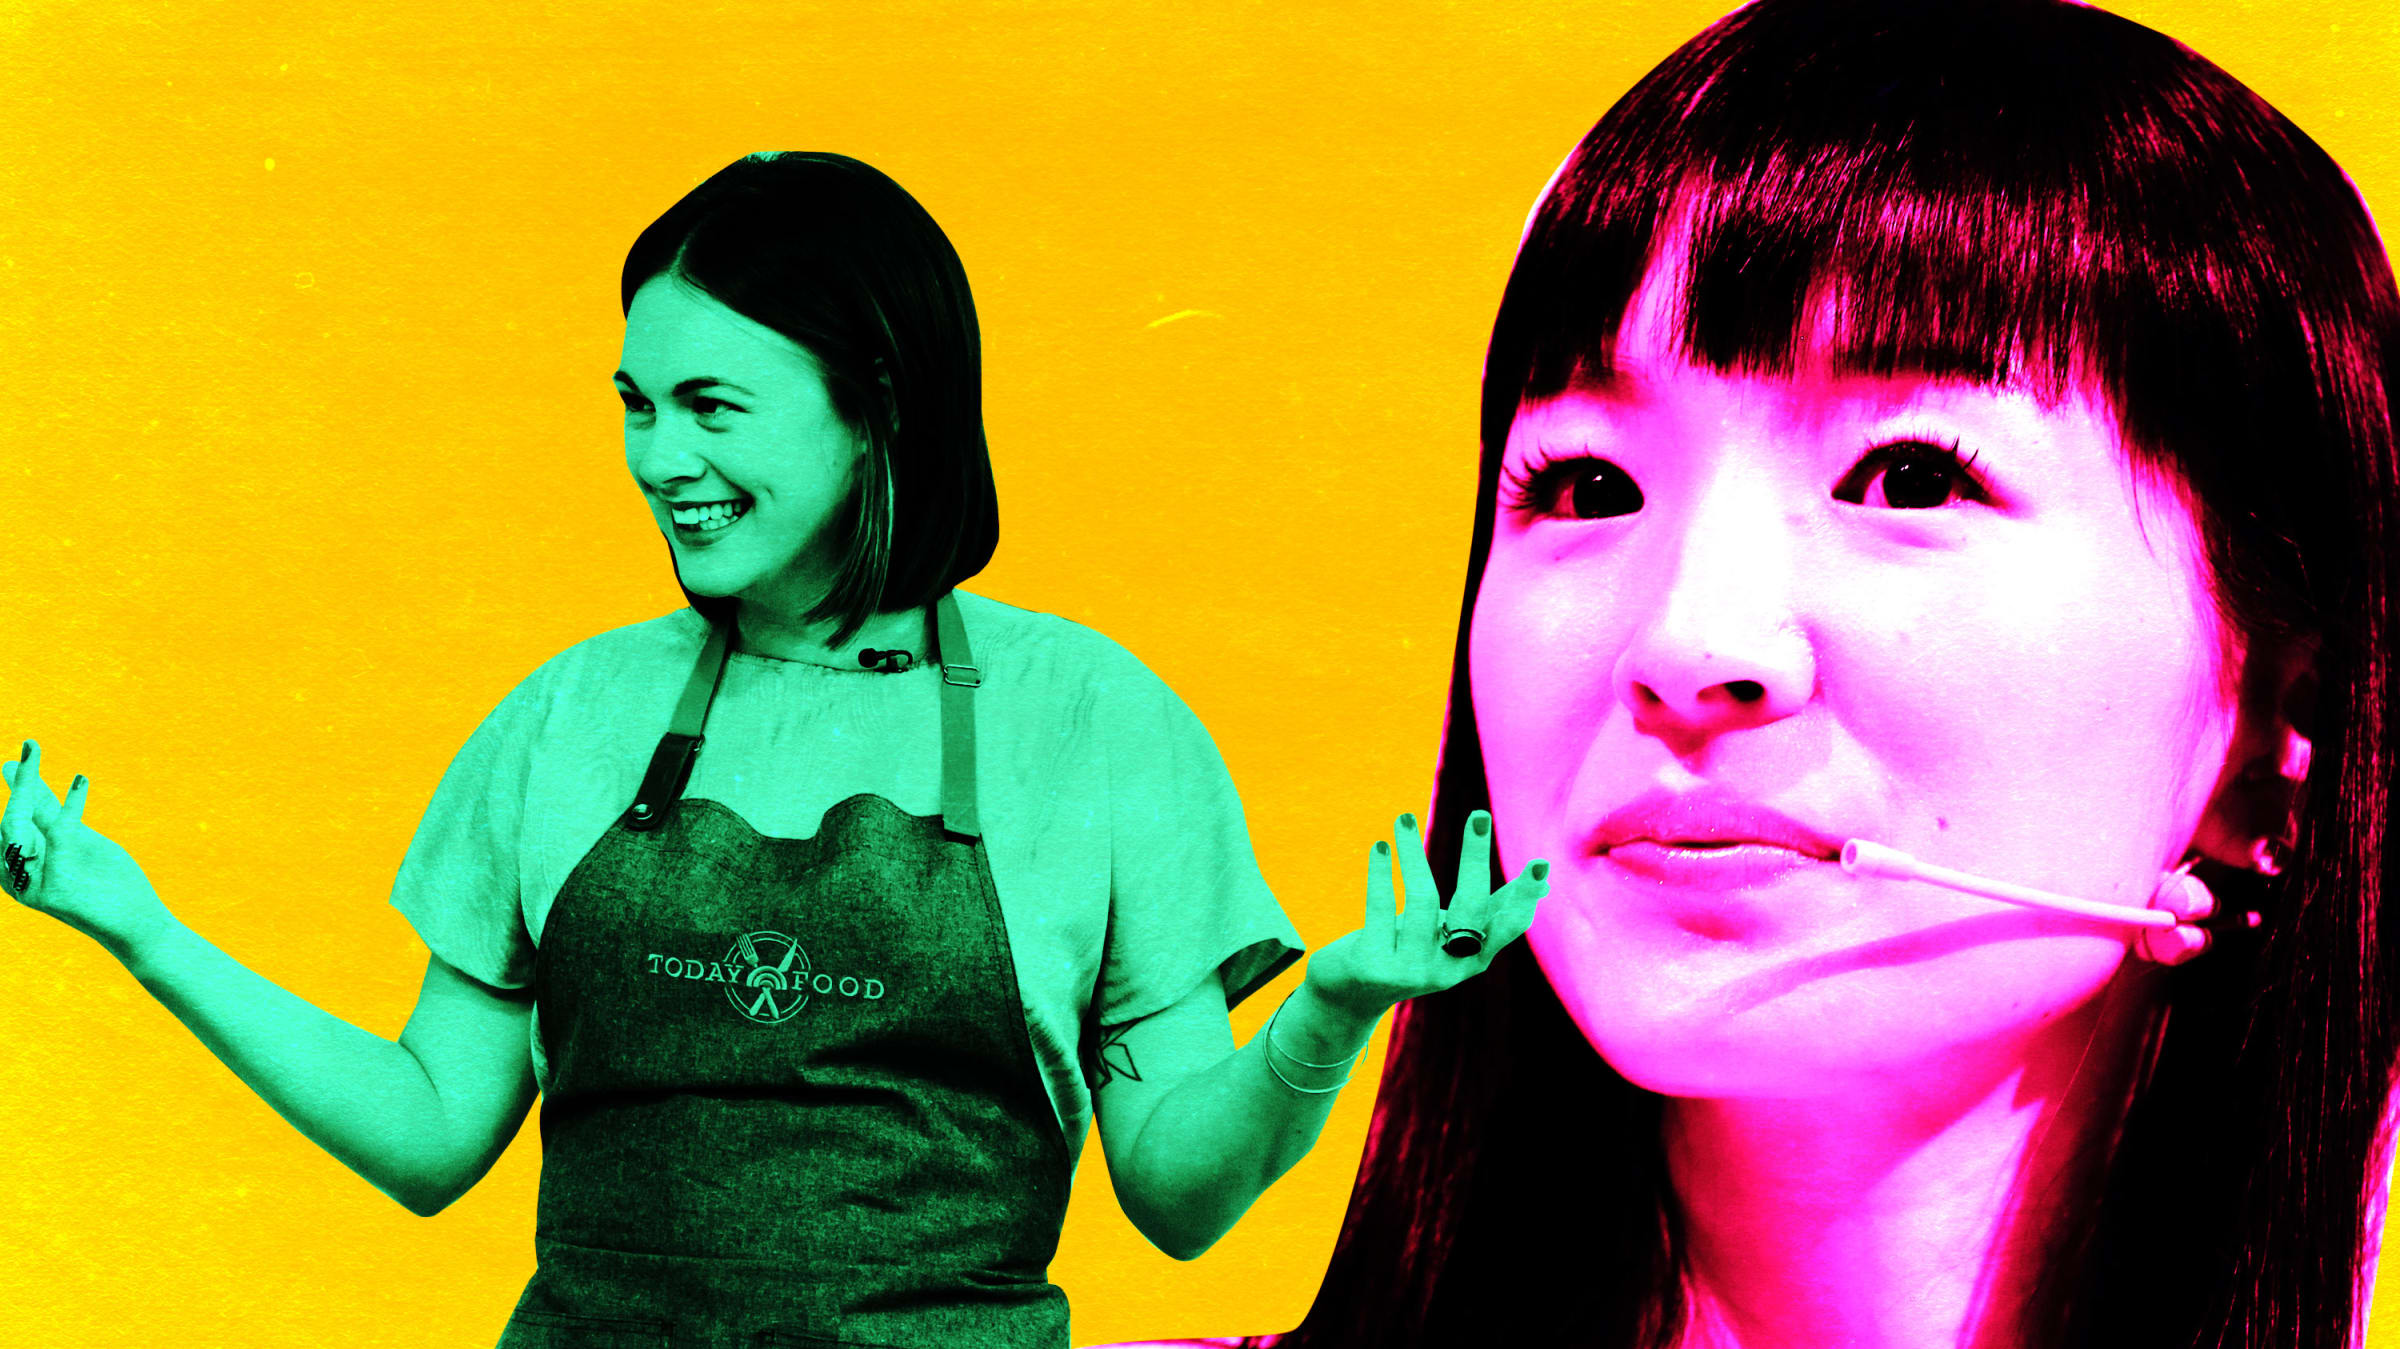 Marie Kondo on 'Sparking Joy' in the Time of COVID and the Alison Roman Mess